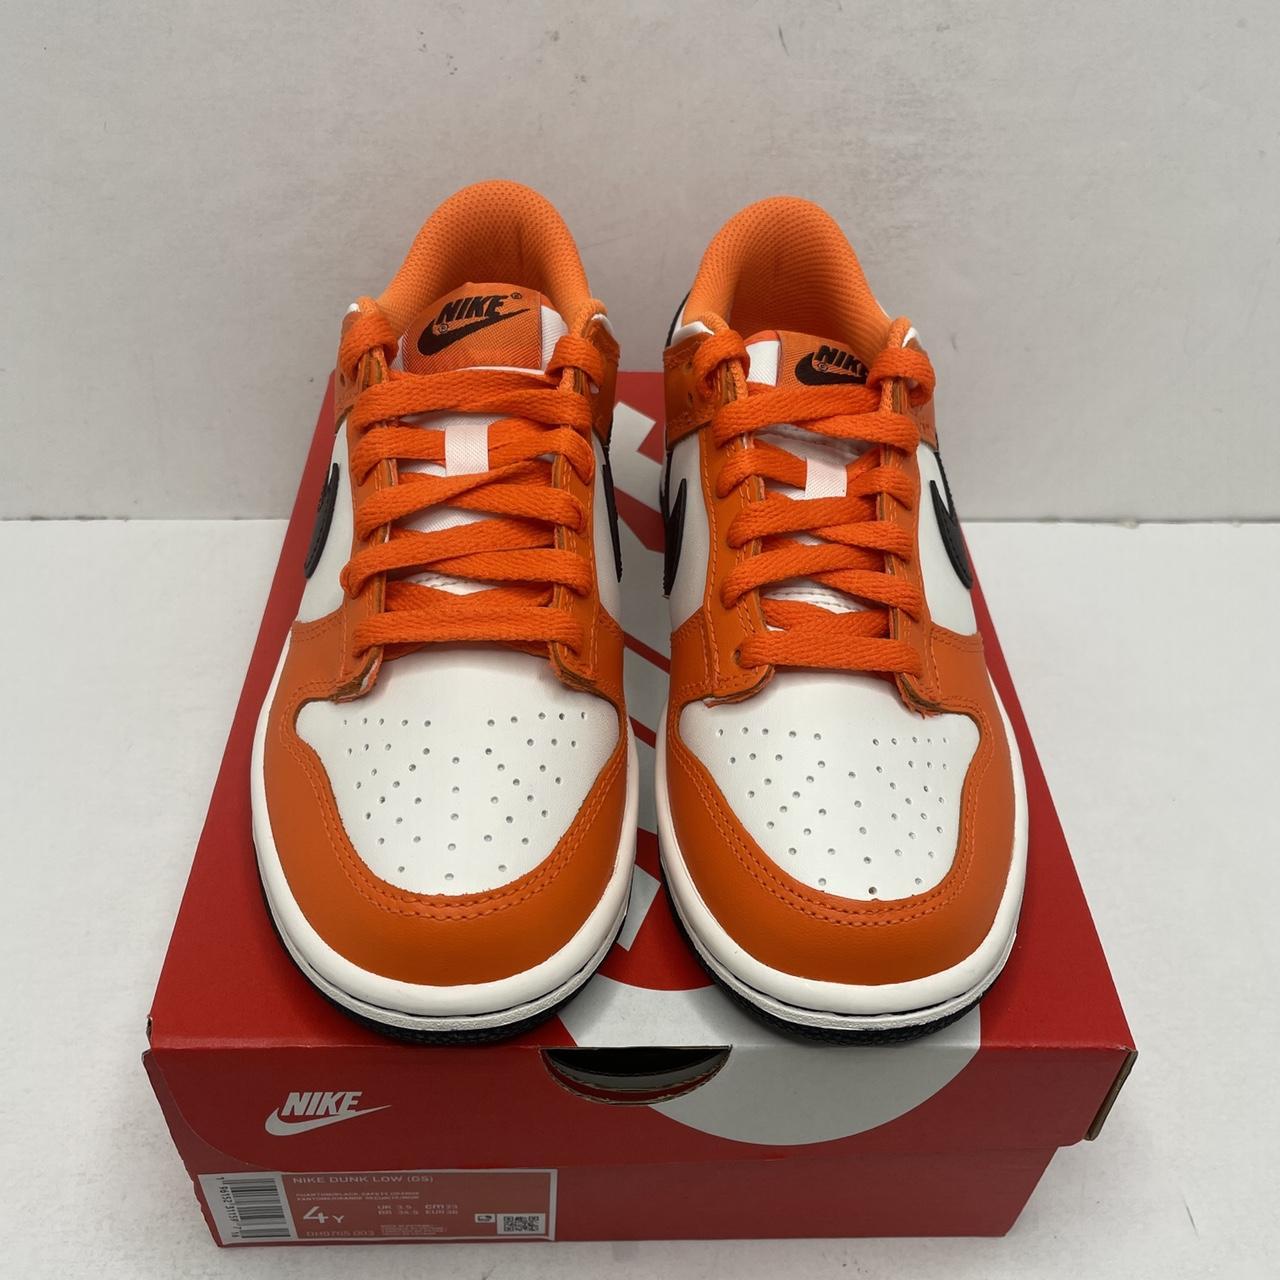 Buy Dunk Low GS 'Halloween' 2022 - DH9765 003